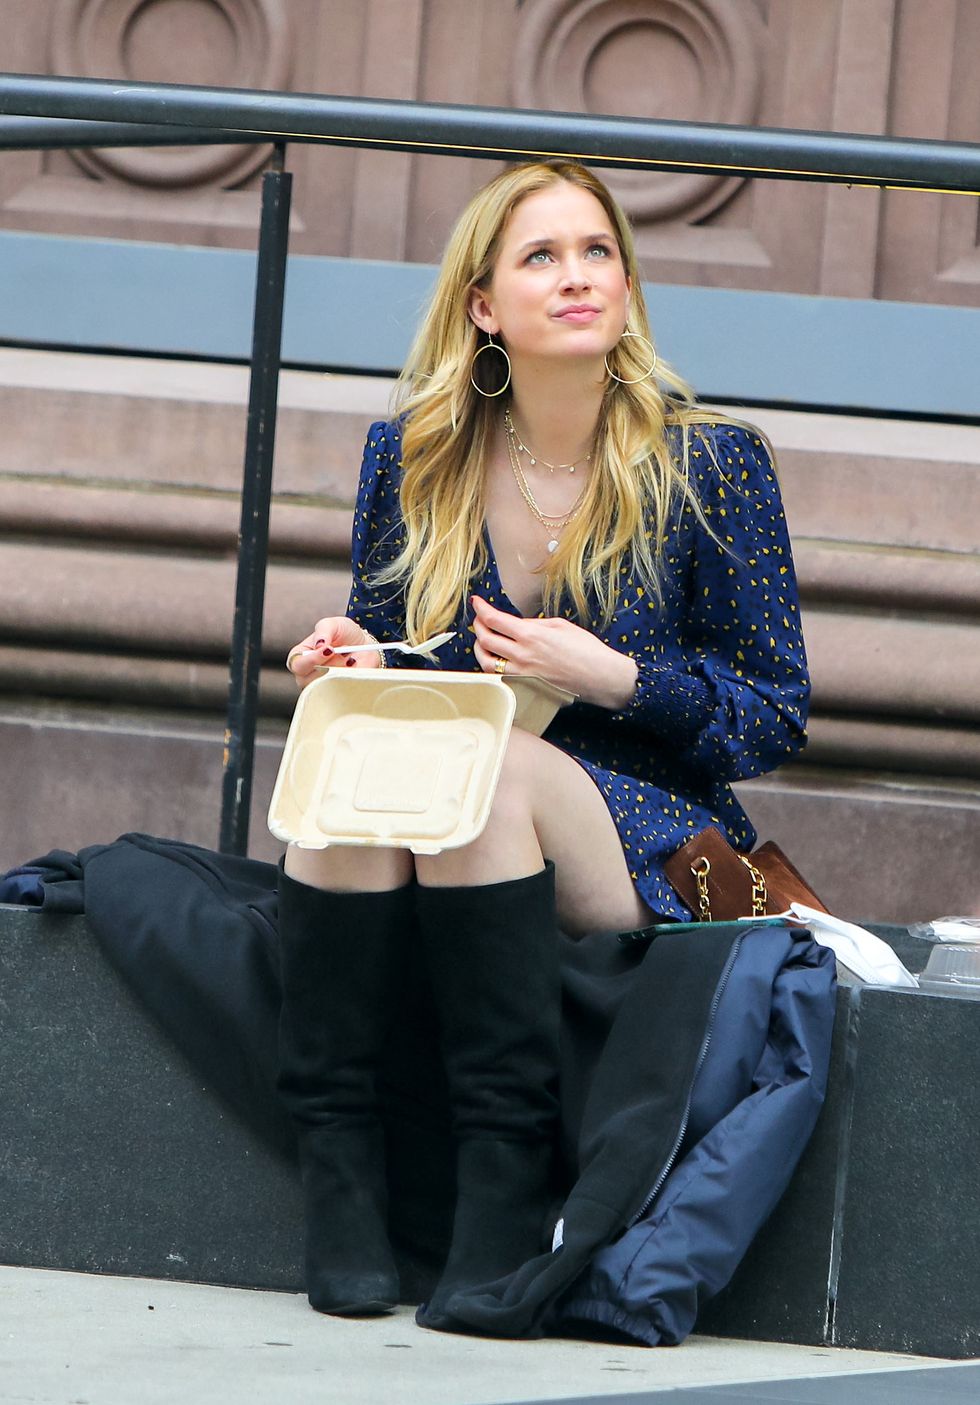 elizabeth-lail-is-seen-at-the-film-set-of-the-gossip-girl-news-photo-1617089178.?crop=1xw:1xh;center,top&resize=980:*